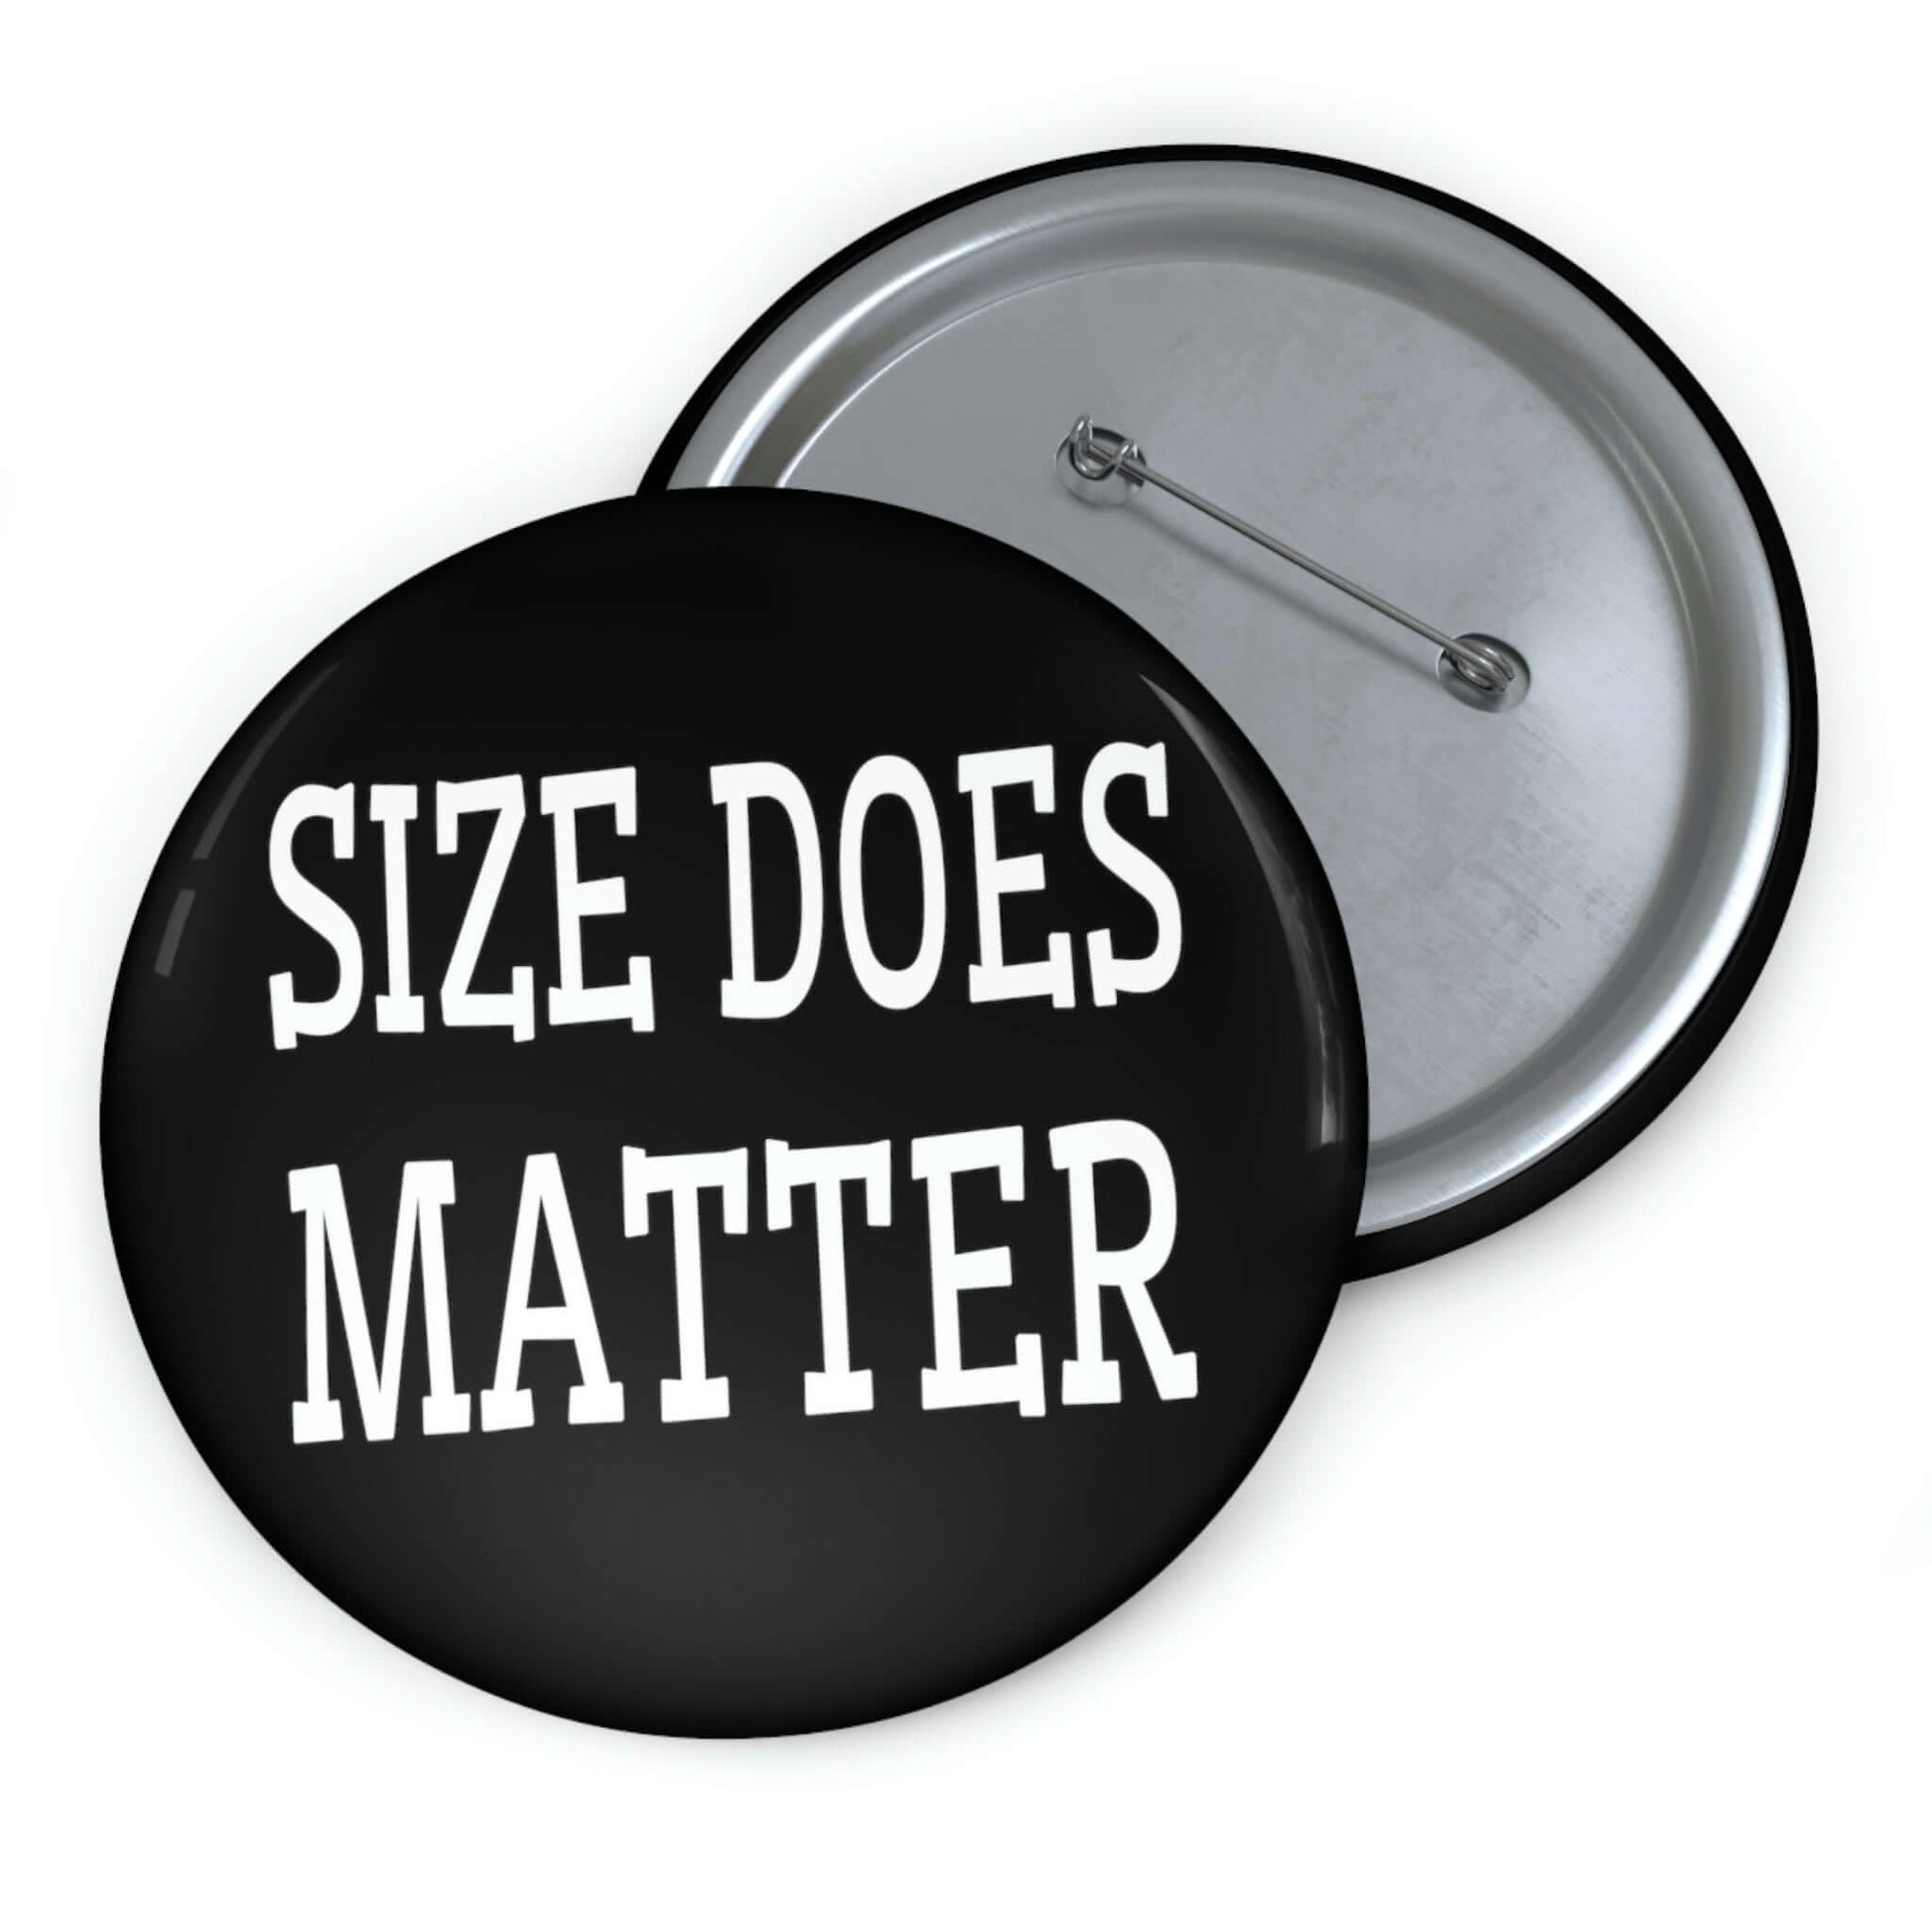 Pinback button that says size does matter.